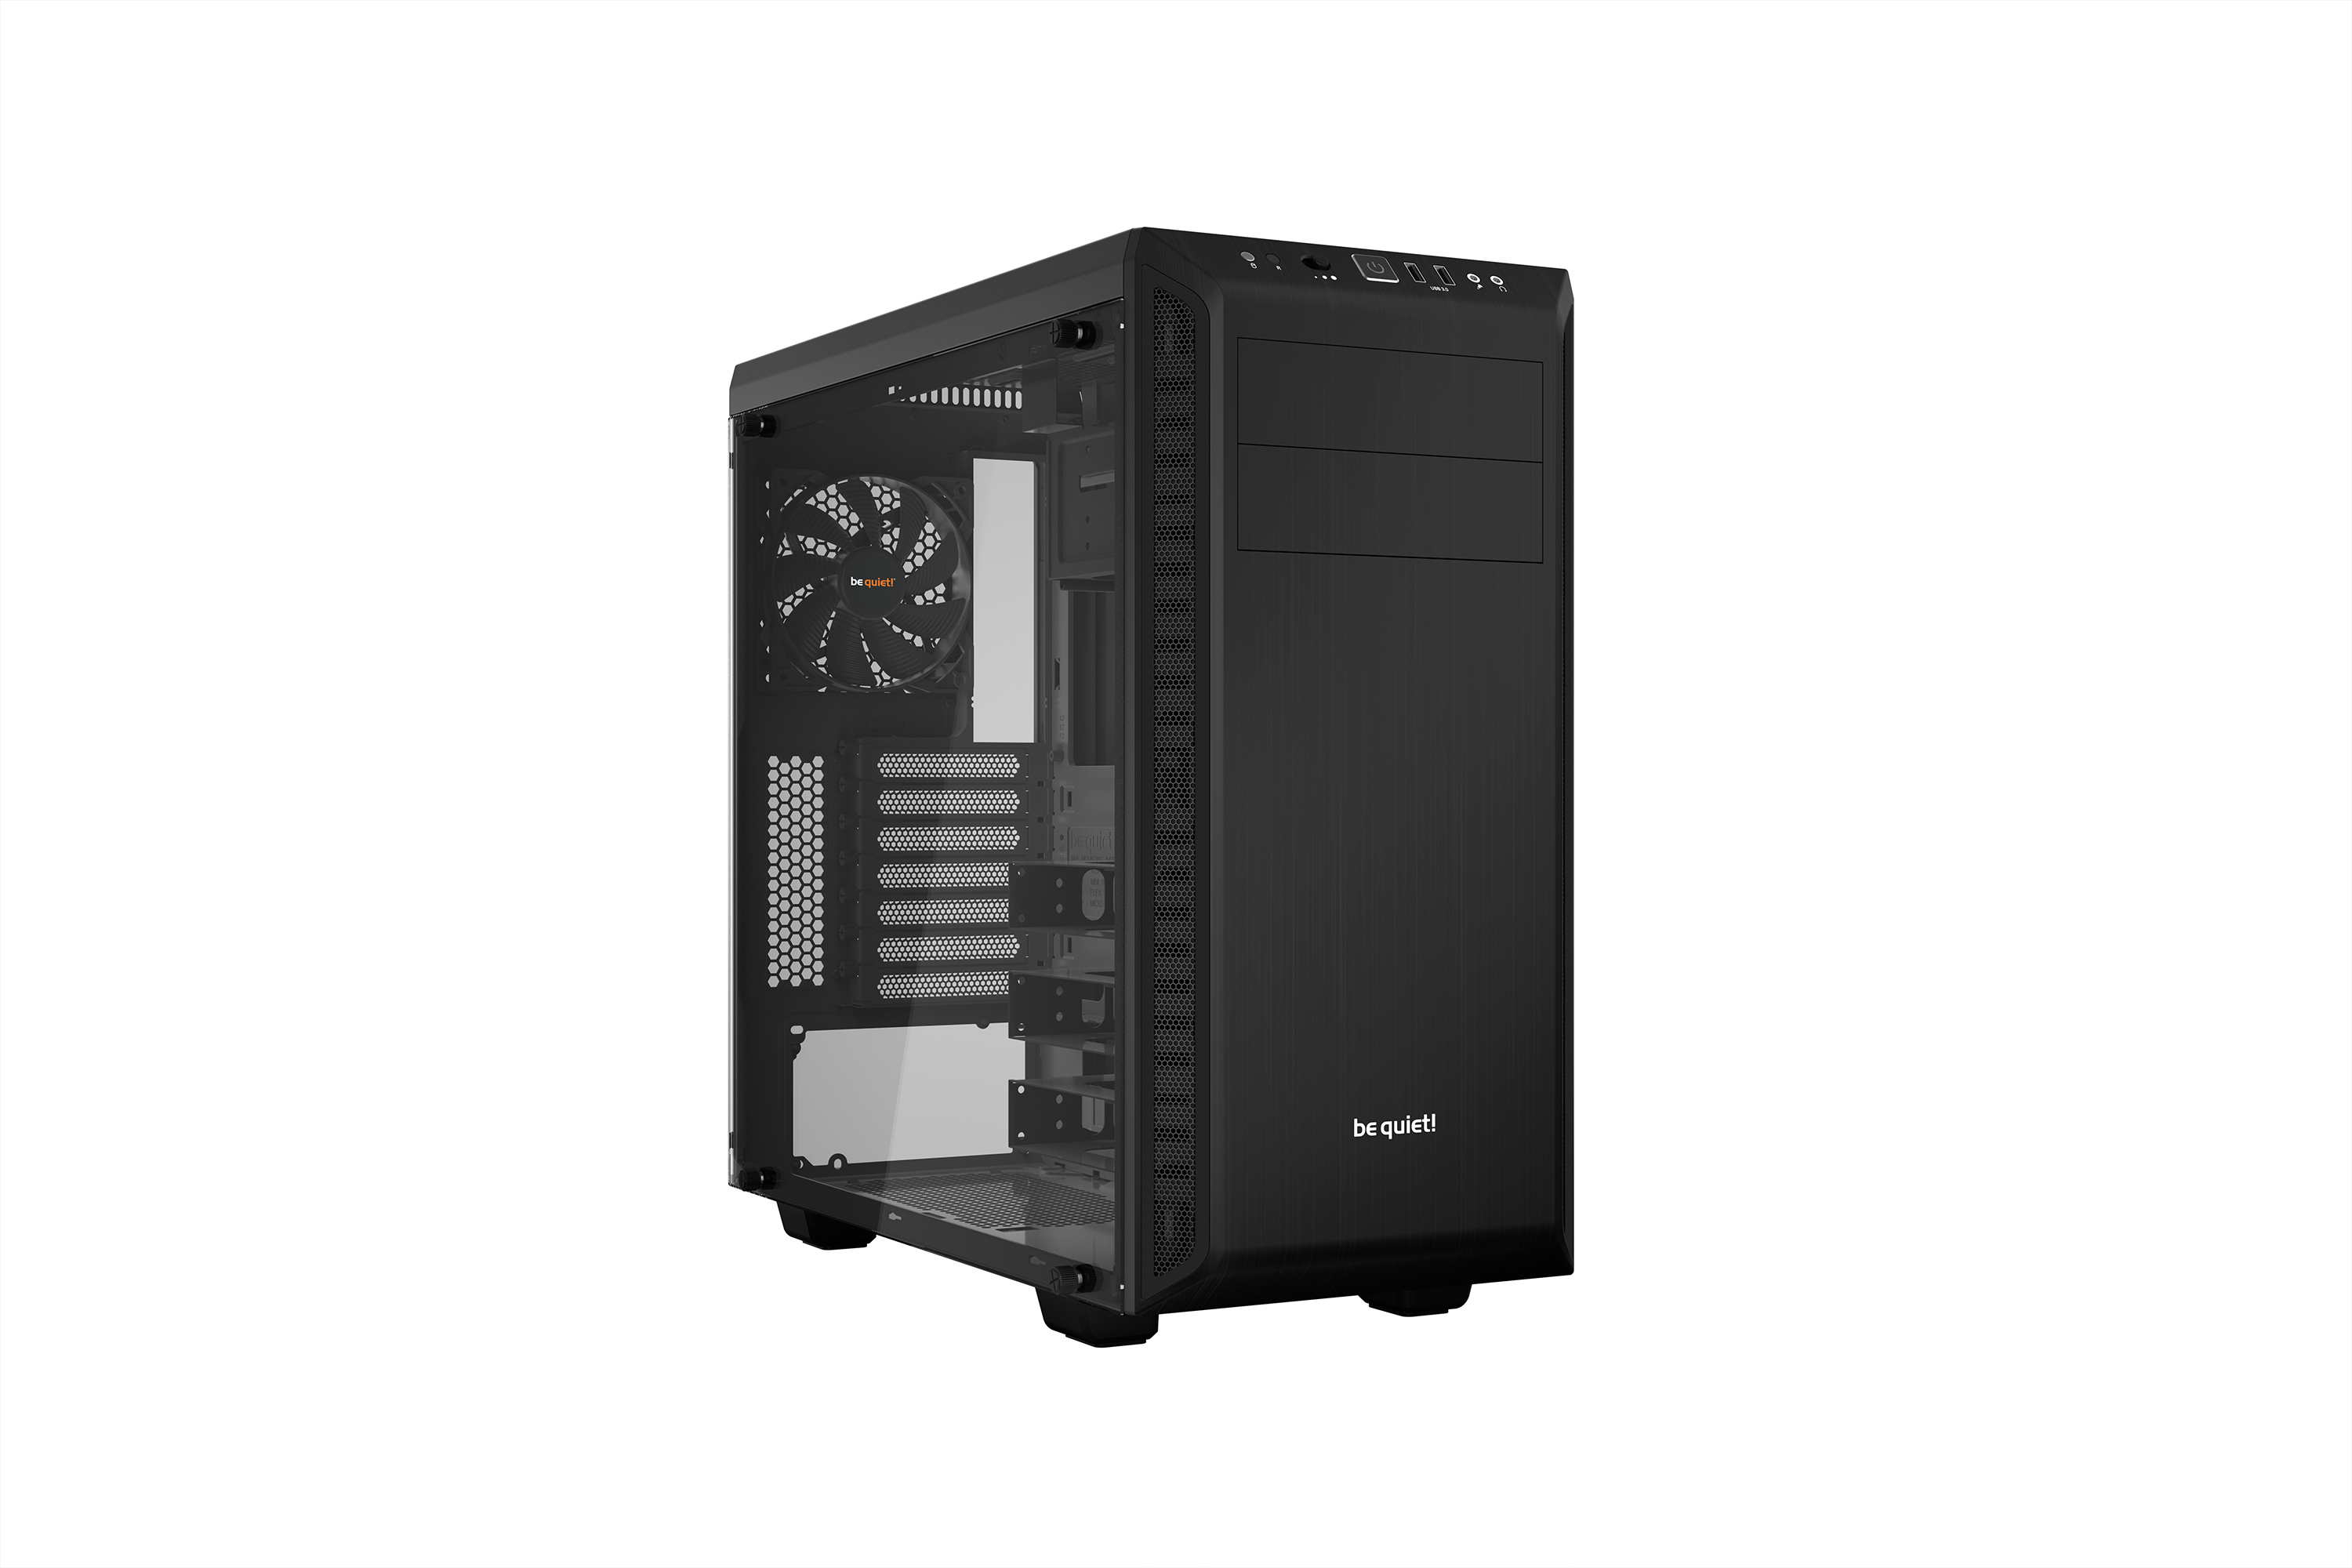 be quiet! Pure Base 600 Window Black, 492 x 220 x 470, IO-panel 2x USB 3.0, HD Audio, 2x 5,25, 3x 3,5, 2x 2,5, inc 1x 140 mm en 1x 120 mm Pure Wings 2, dual air channel cooling, 3 step fan controller 3x3 pin, Watercooling ready, Glass Windows Side Panel